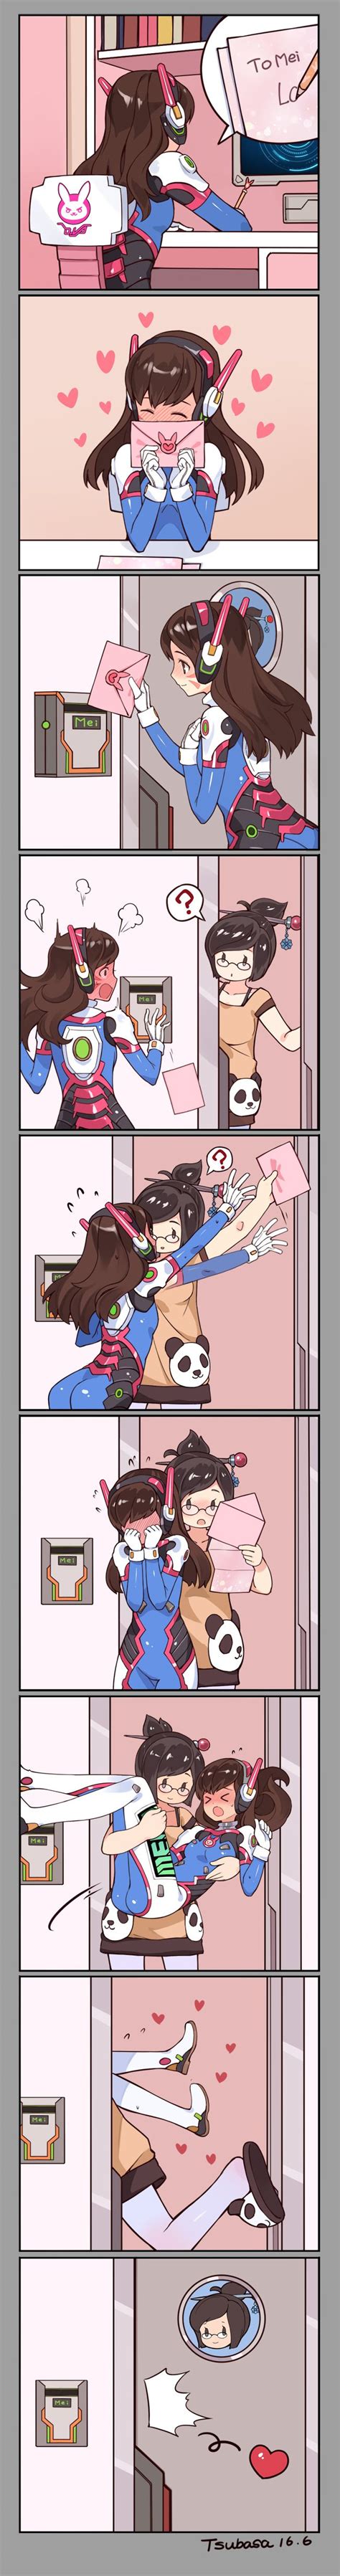 17 Best Images About Overwatch On Pinterest Funny Overwatch Comic